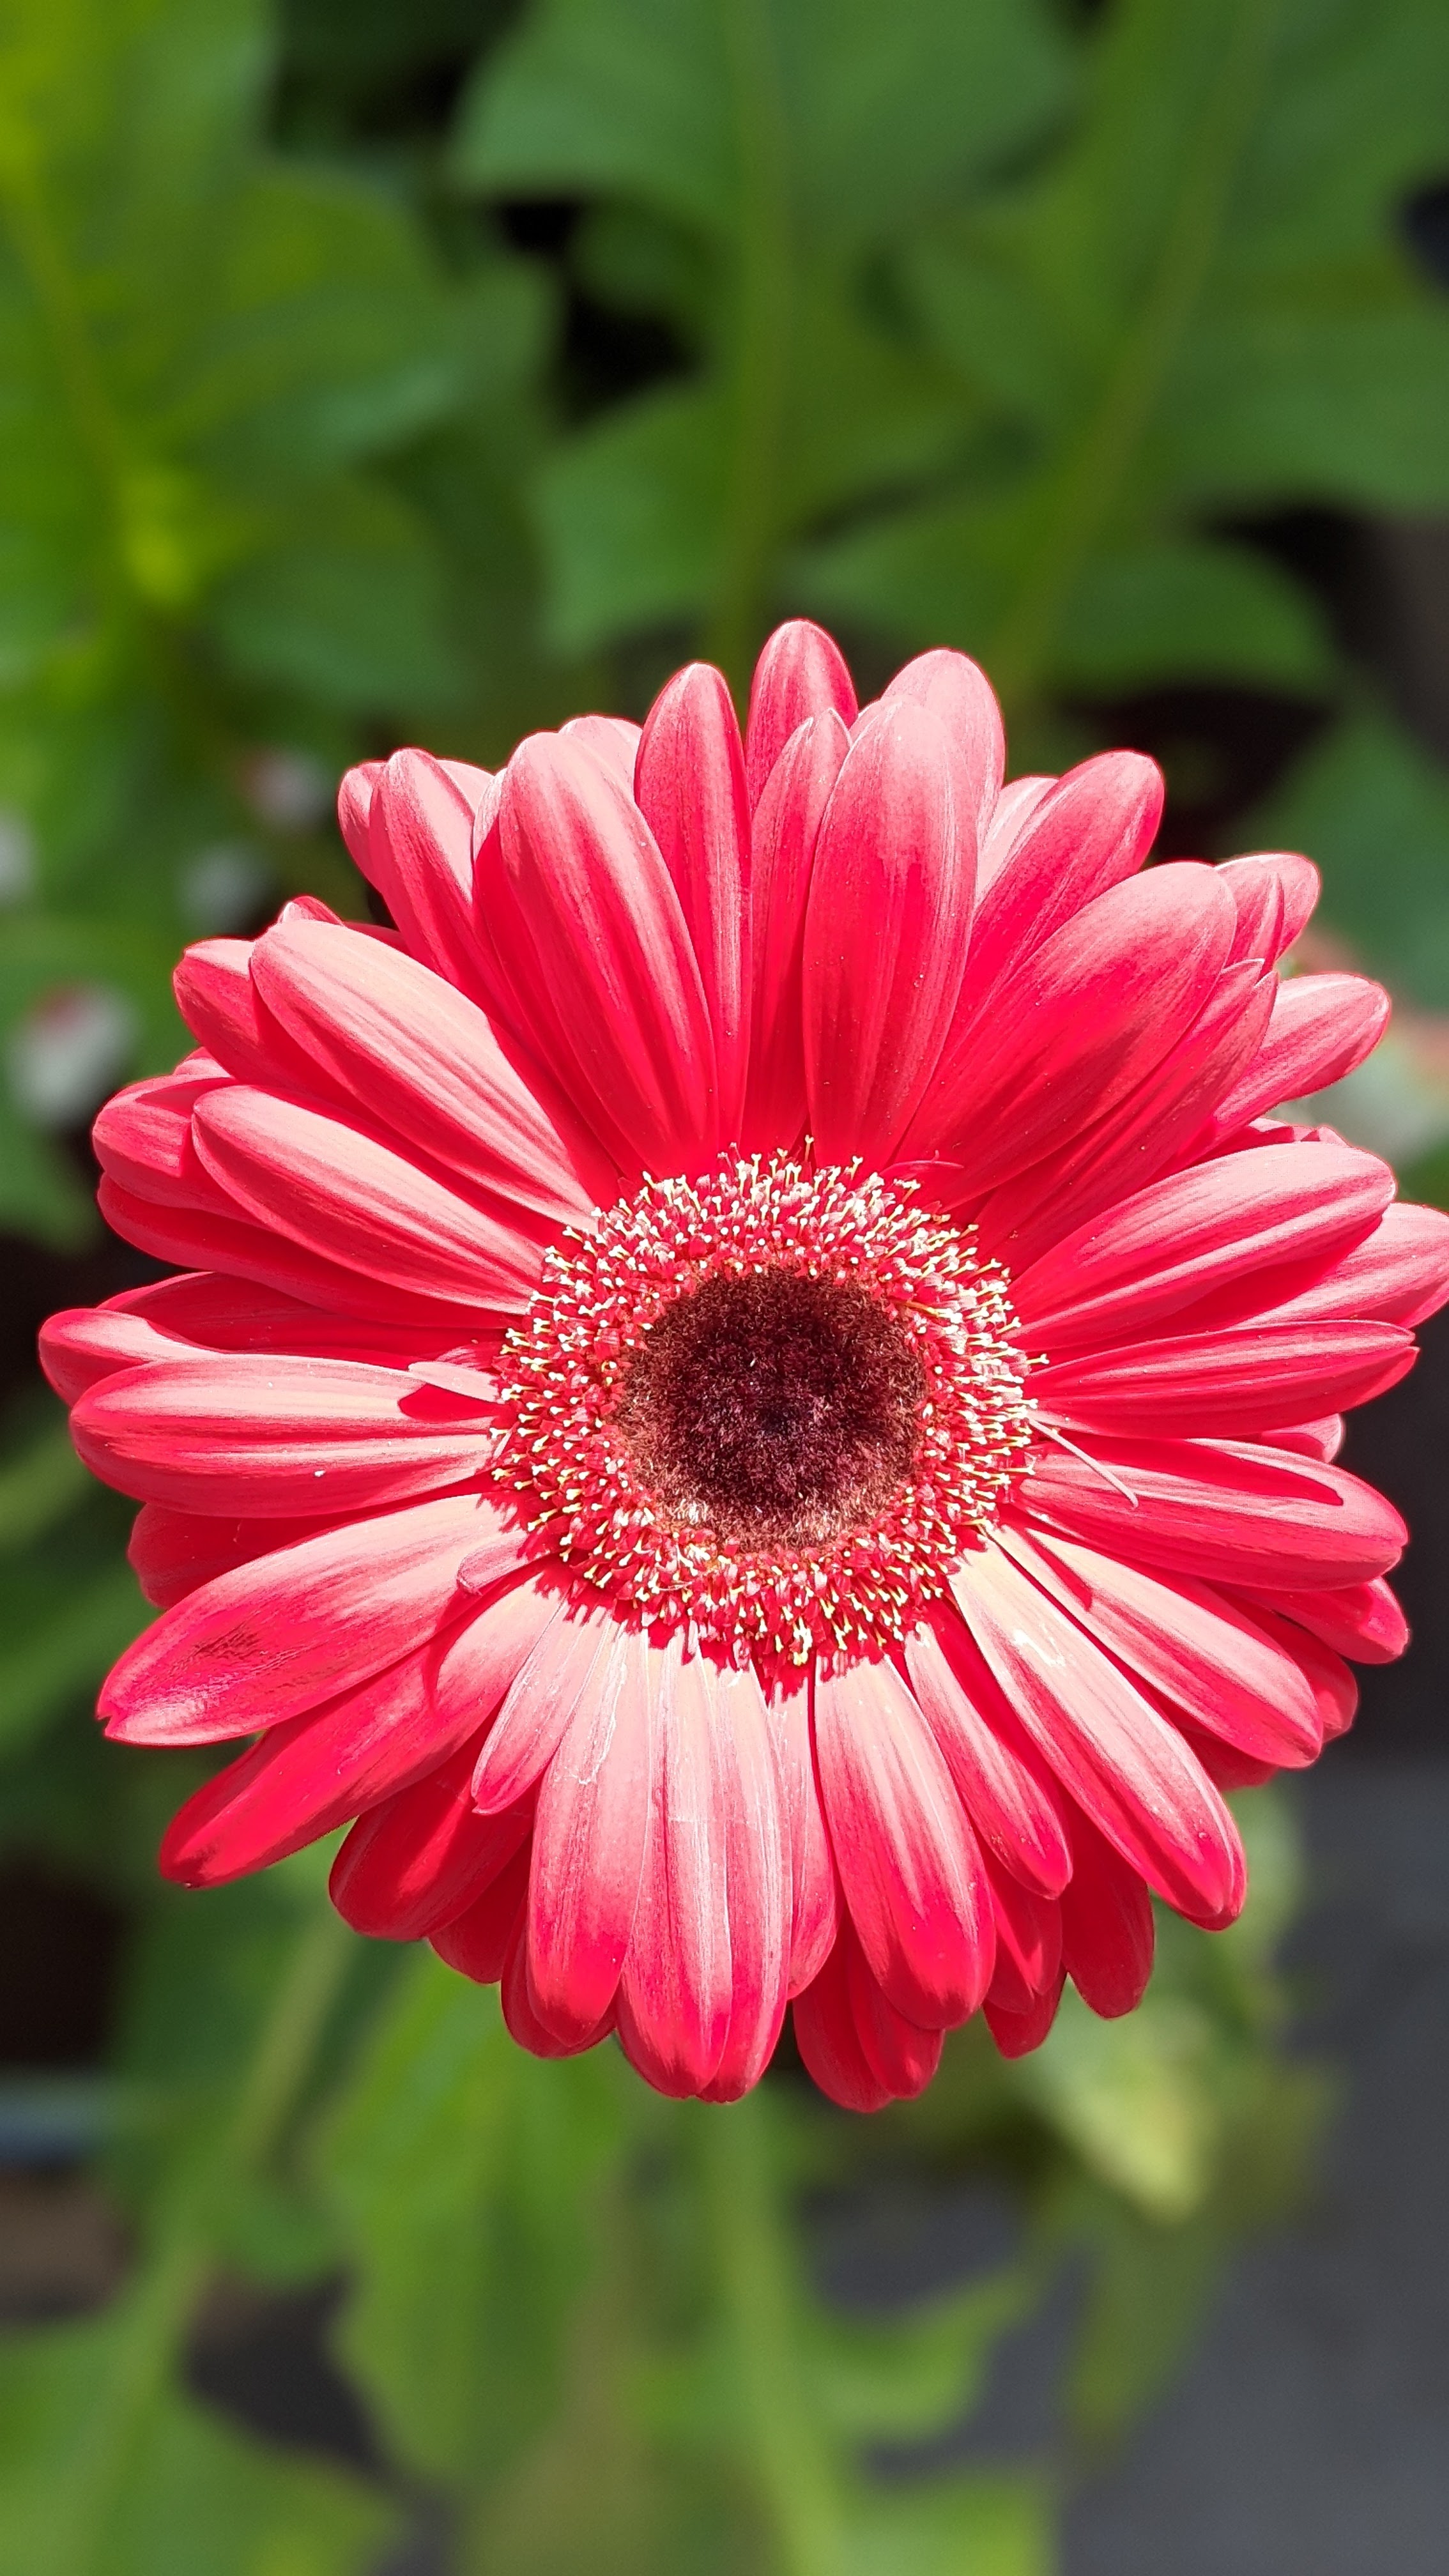 Pink flower photo that feels 3D